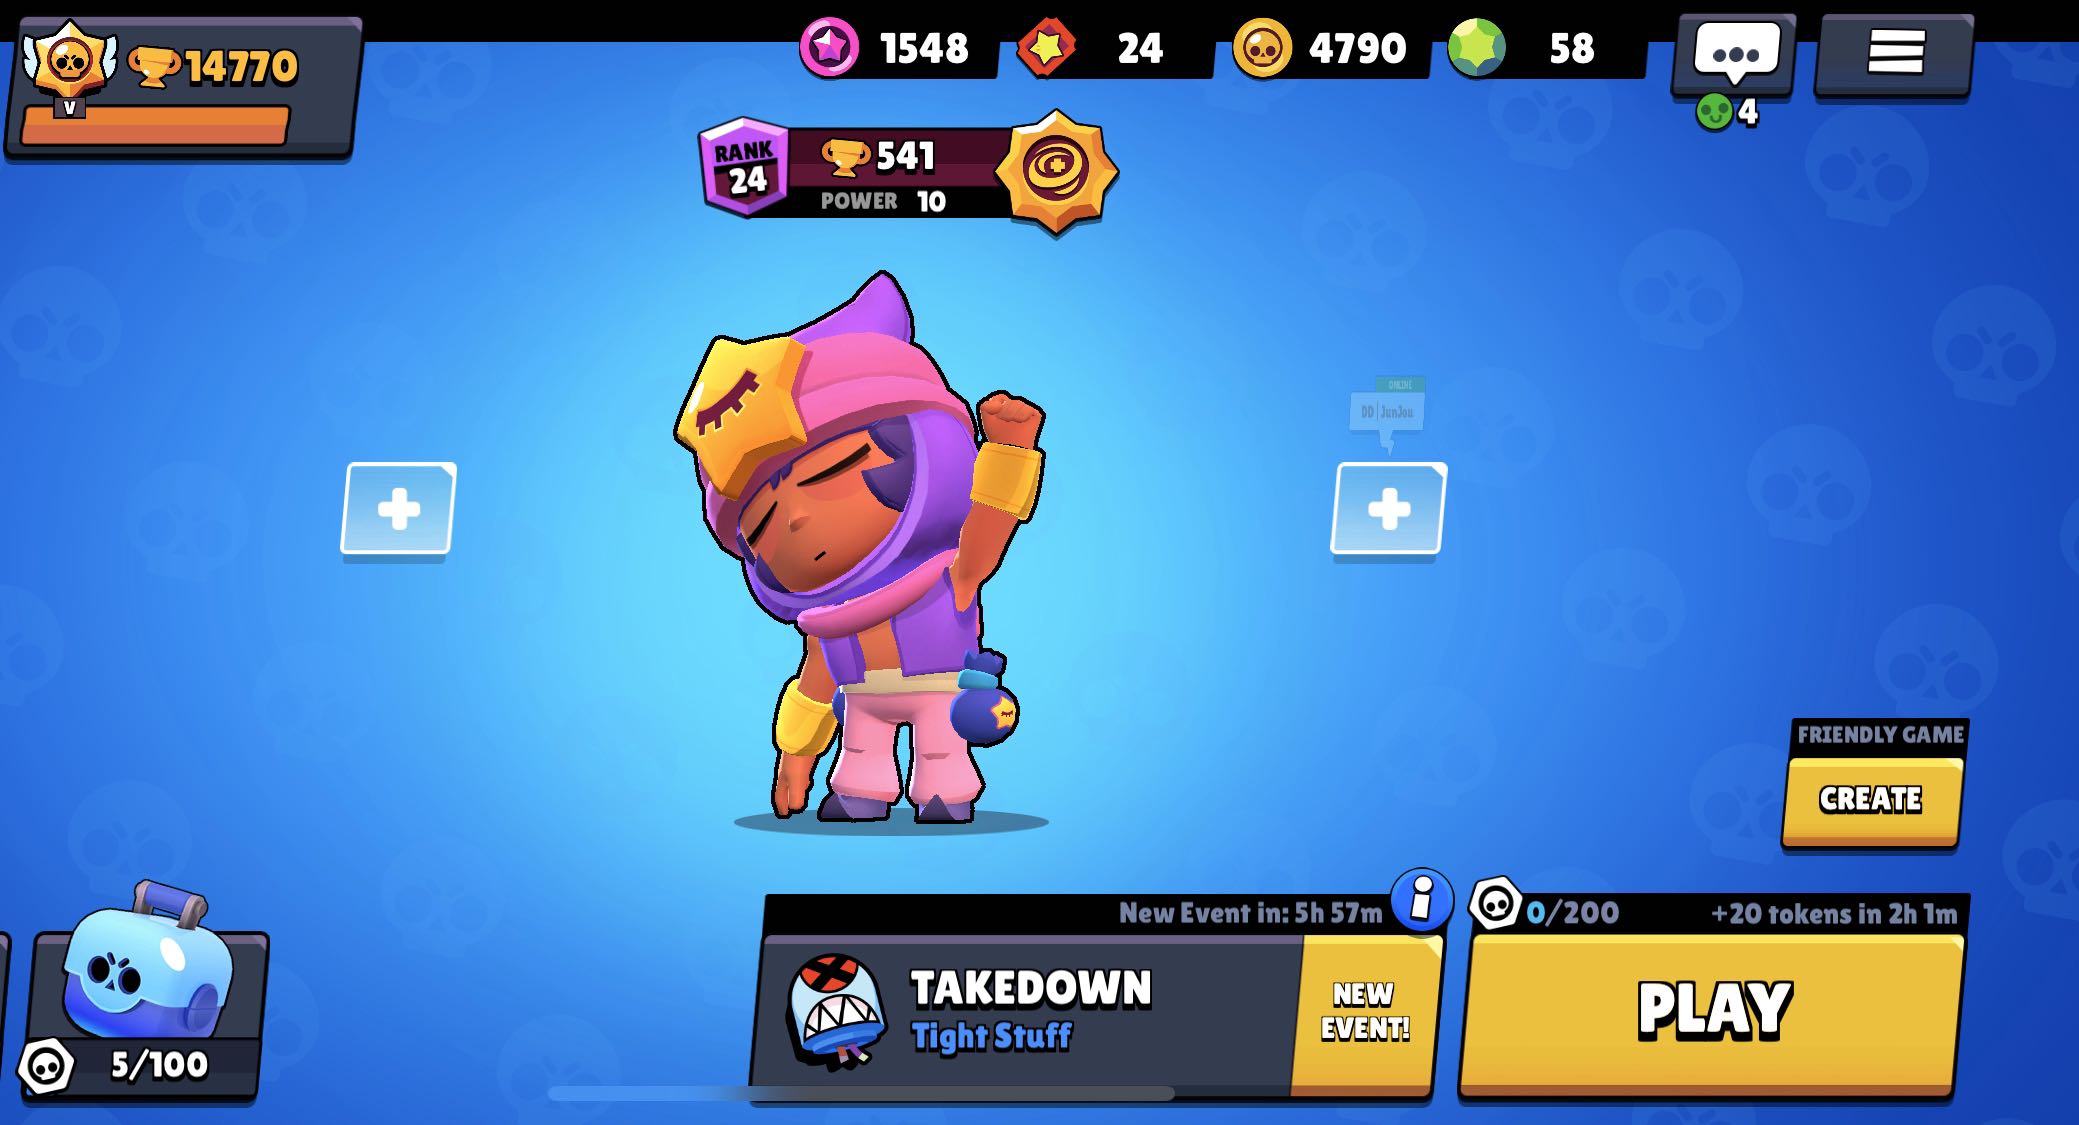 Brawlstars Best Deal Most Starpowers Most Skins Sandy And Werewolf Leon Video Gaming Gaming Accessories Game Gift Cards Accounts On Carousell - brawl stars sandy star power